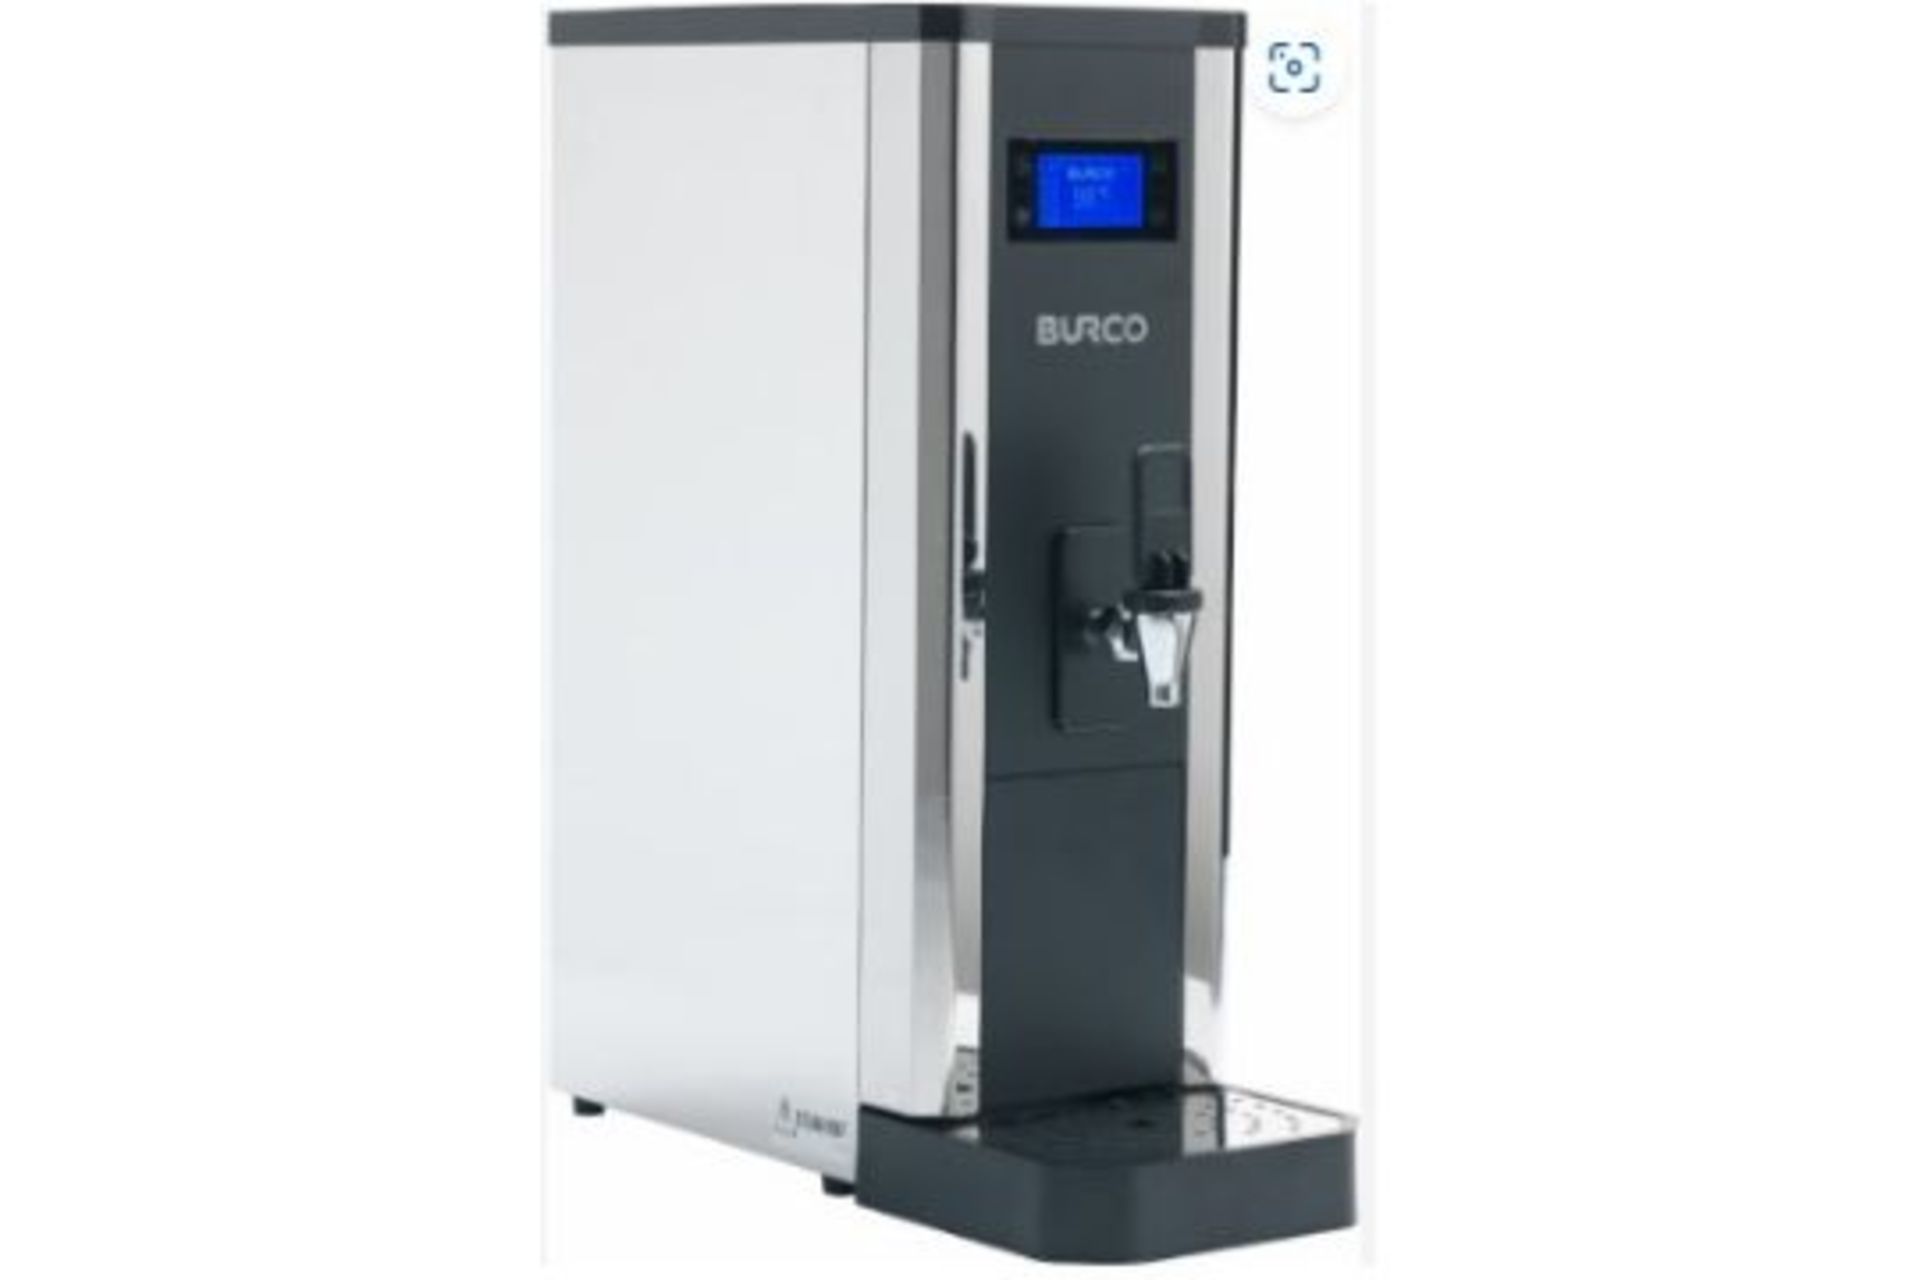 New & Boxed Burco Slimline Autofill 10L Water Boiler with Filtration (tap operated). (PALLET - Image 3 of 3